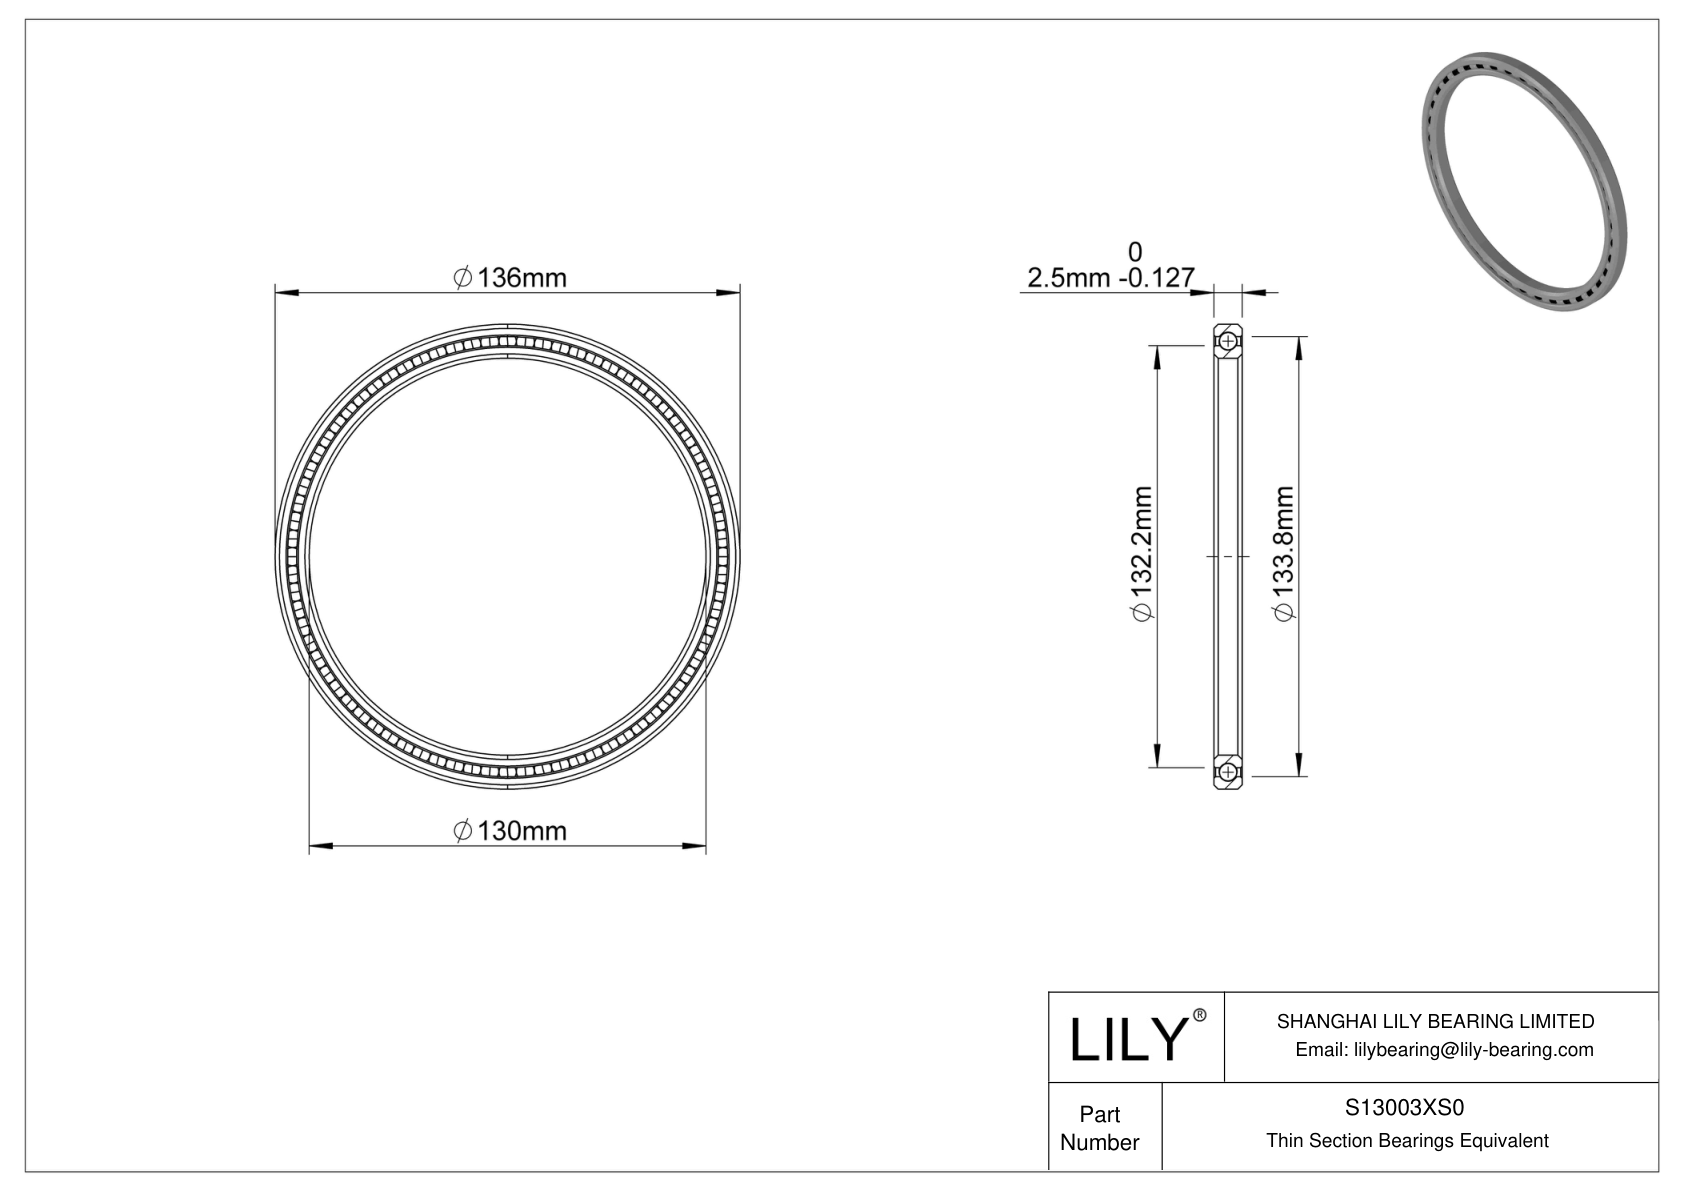 S13003XS0 Constant Section (CS) Bearings cad drawing